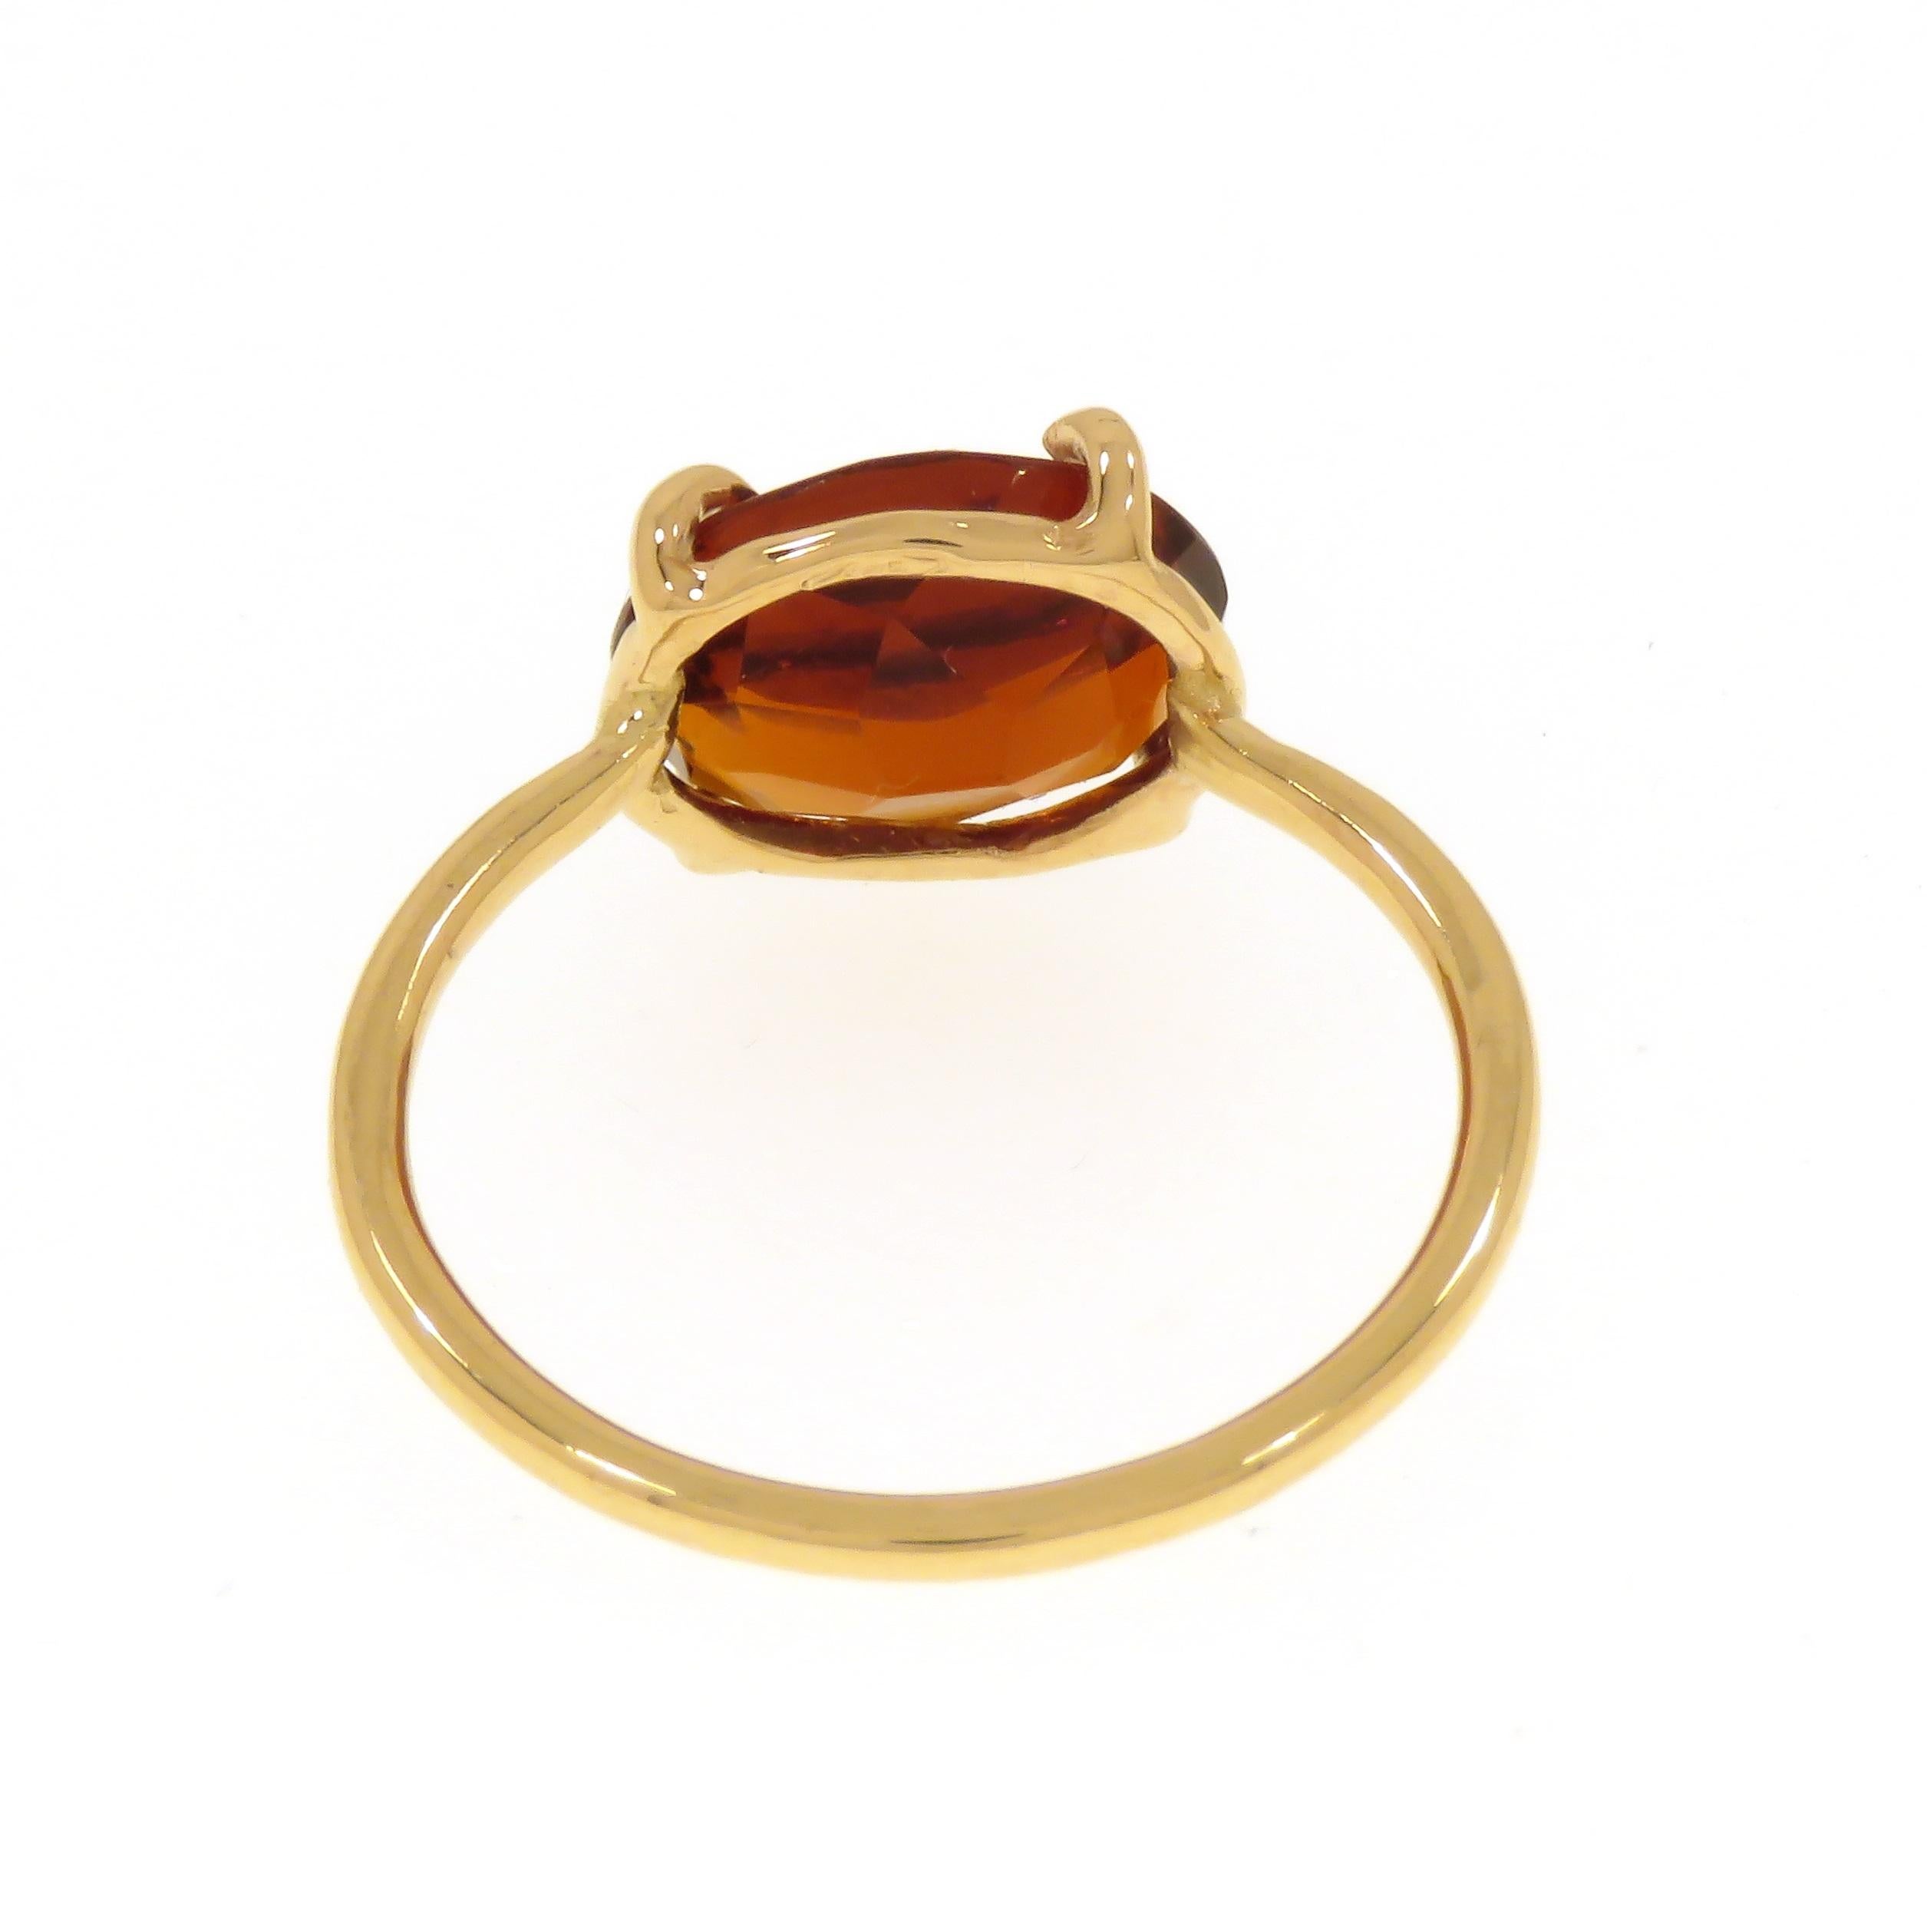 Oval Cut Garnet 9 Karat Rose Gold Ring Handcrafted in Italy For Sale 2